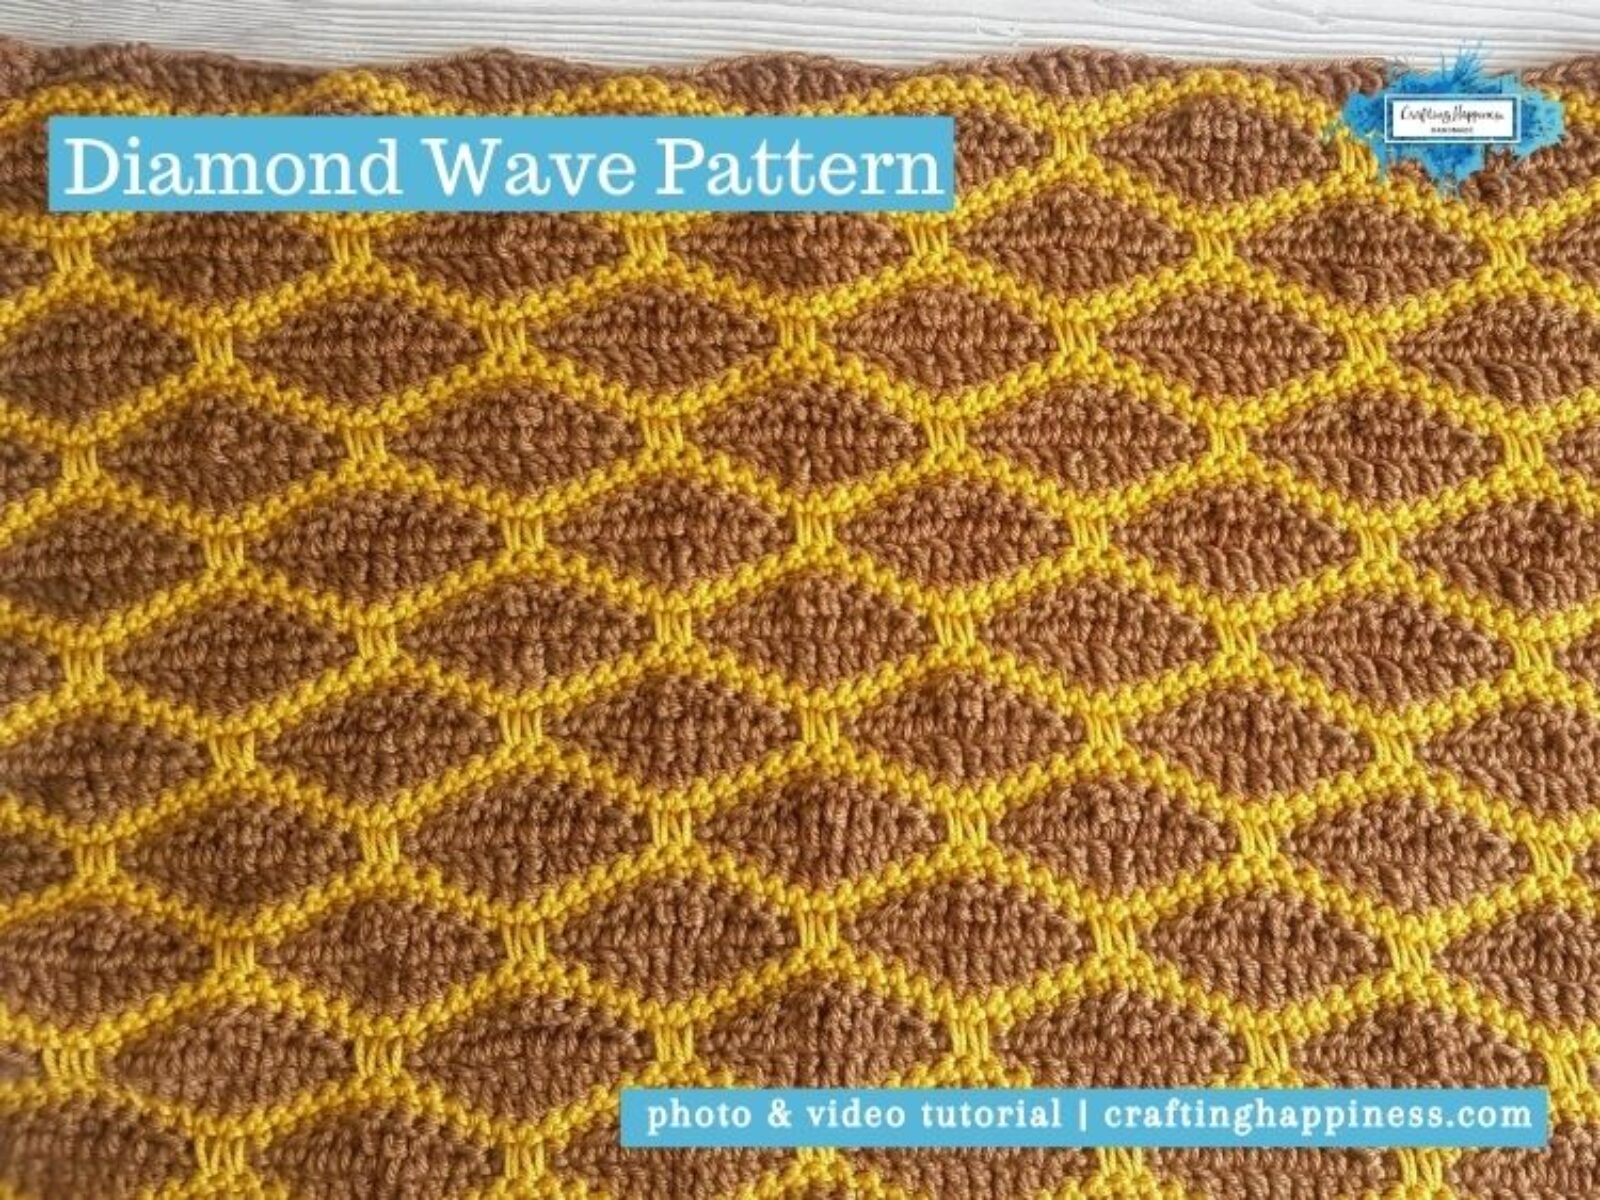 Diamond Wave Pattern by Crafting Happiness FACEBOOK POSTER